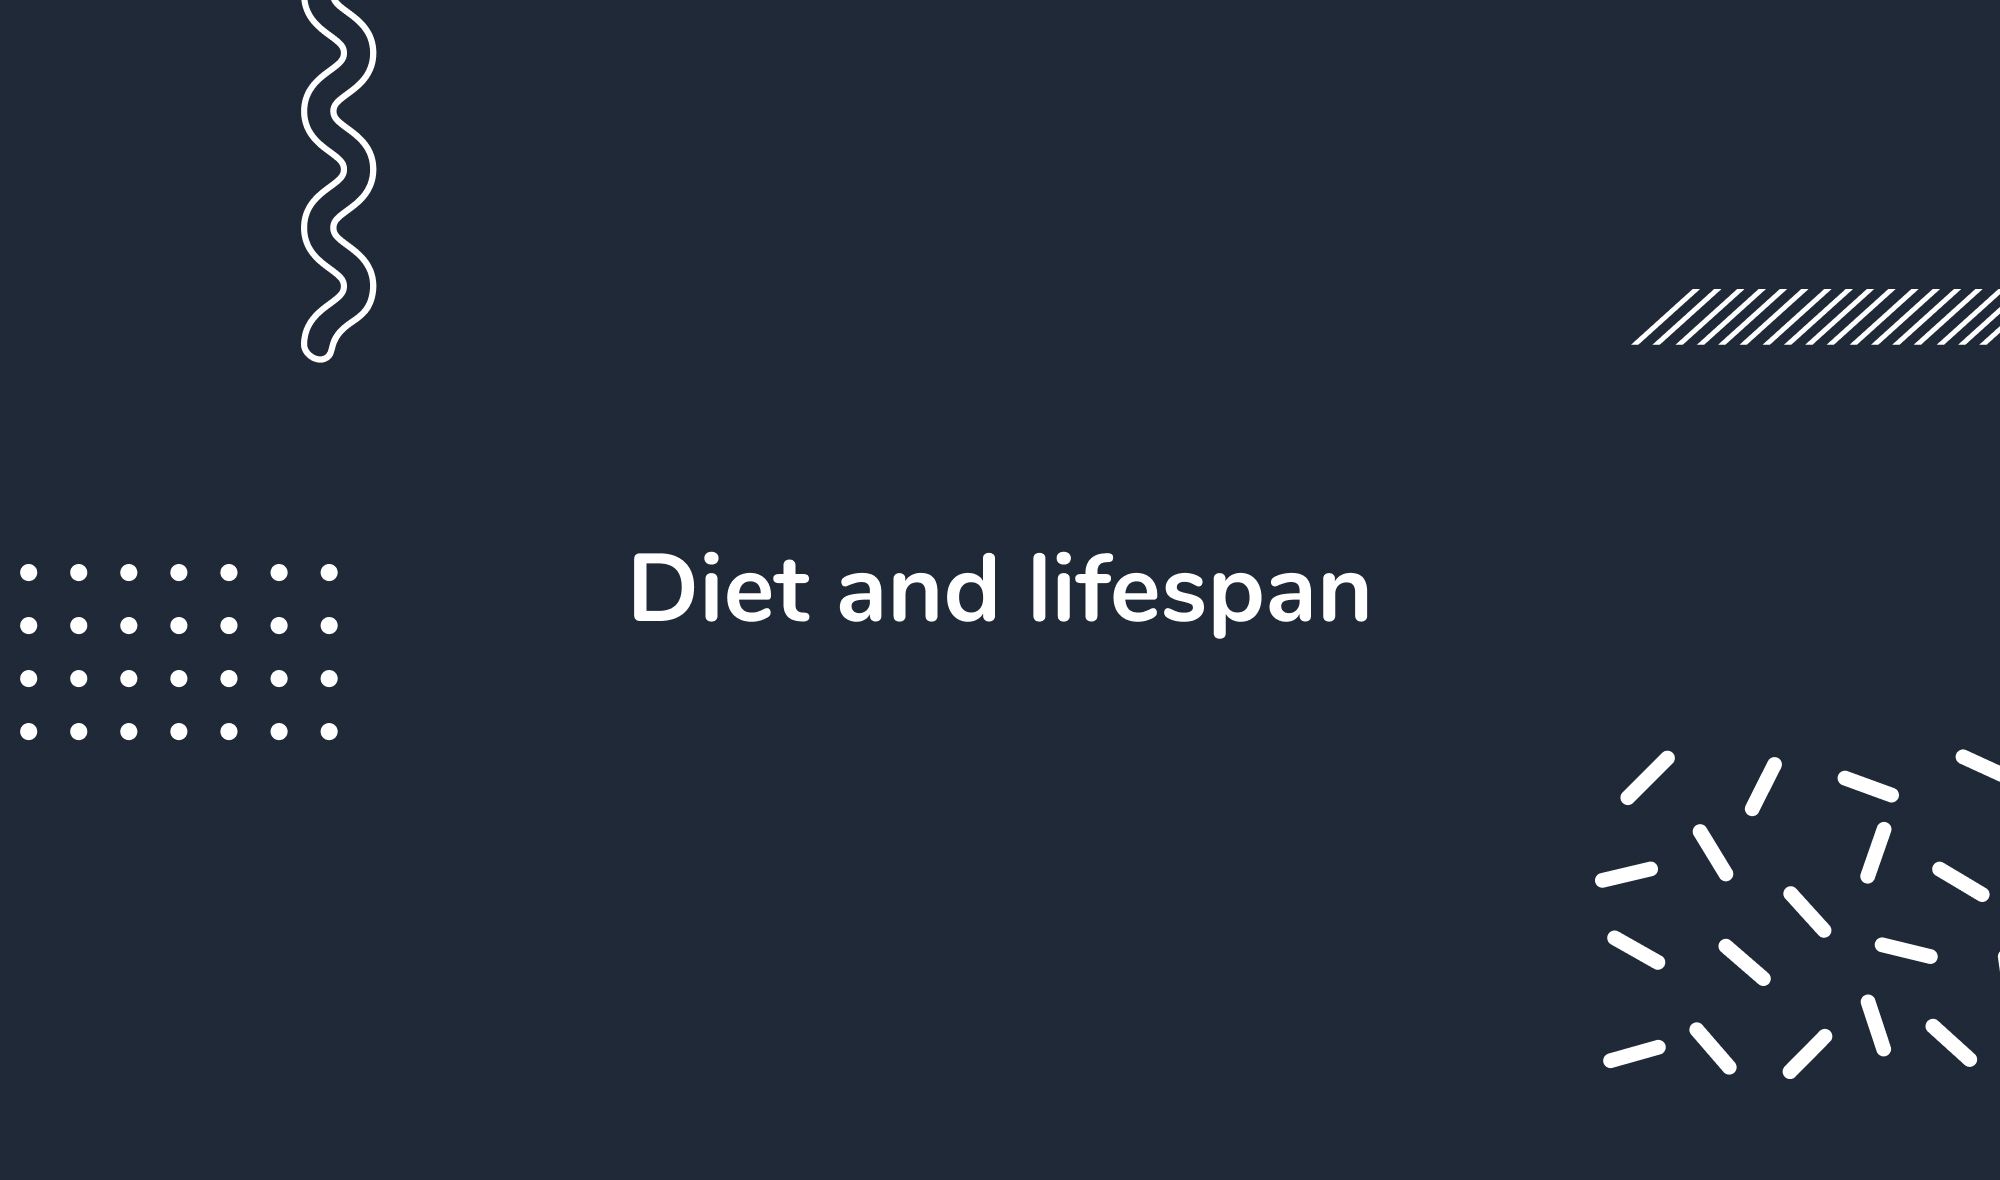 Diet and lifespan